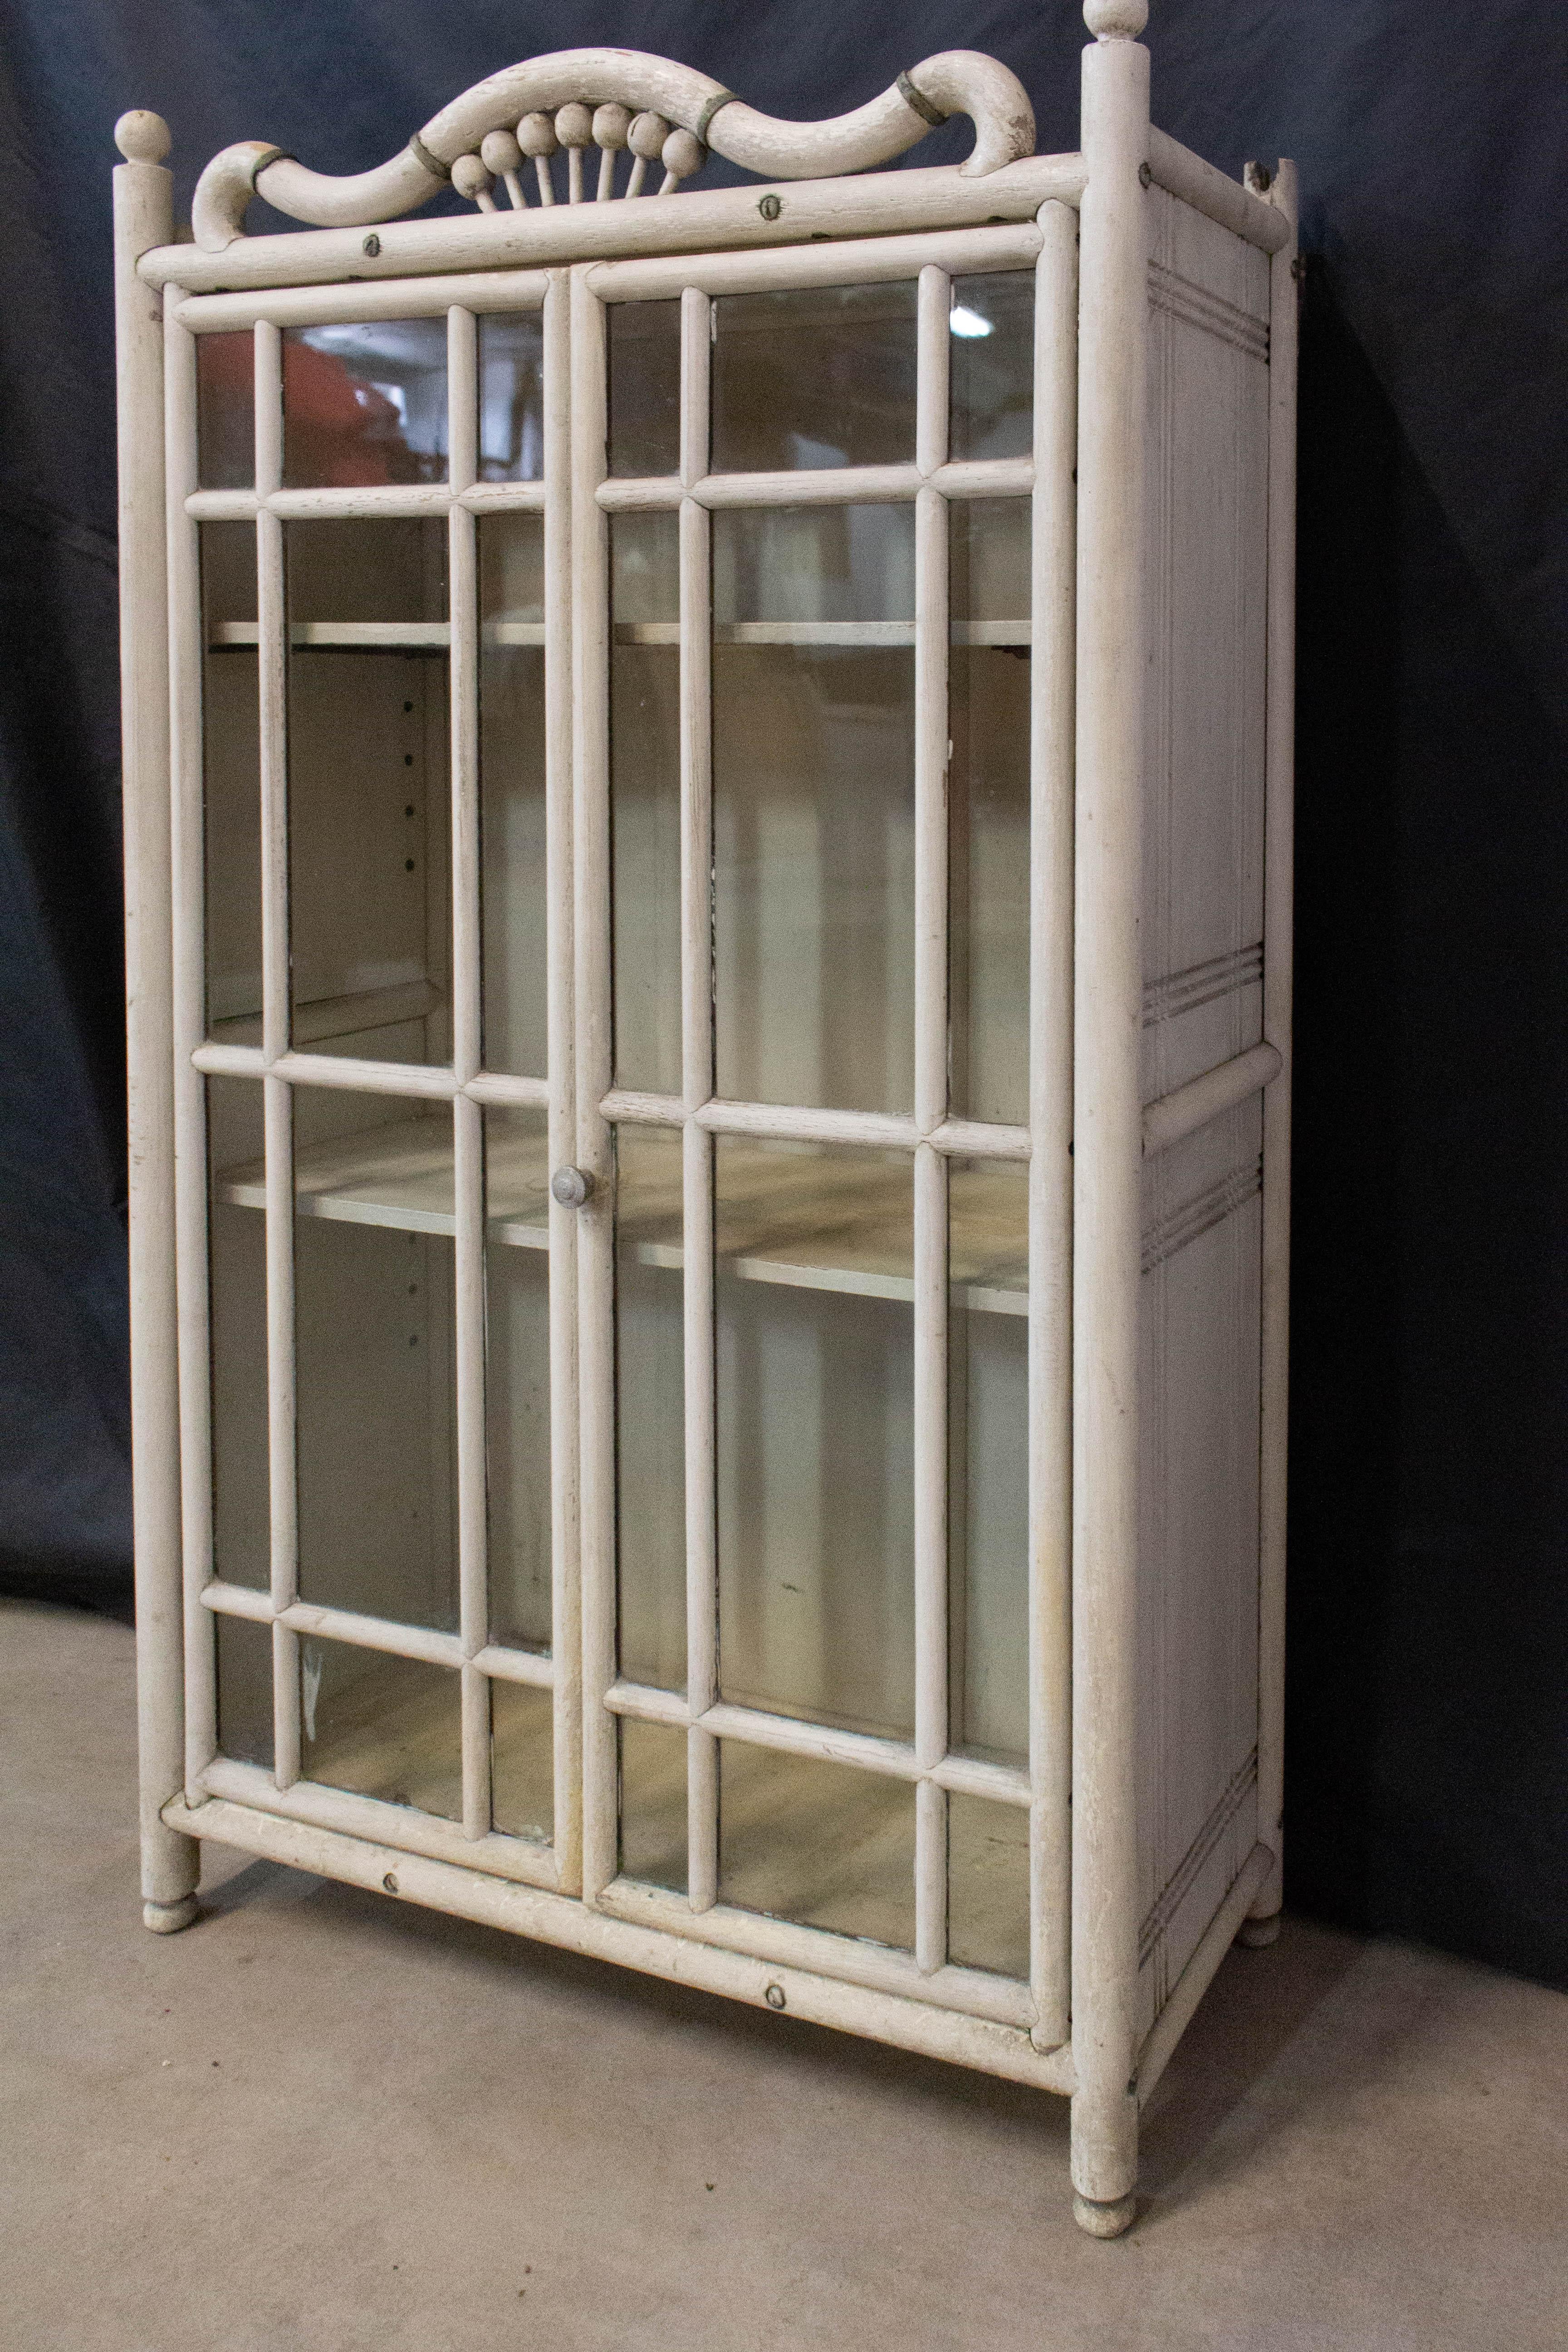 Hanging cabinet or small vitrine, France, circa 1920
Beveled glass
Removable shelves
Gap between shelves from 16 cm to 34 cm

For shipping:
Measures: 21.5 x 45.5 x 76.5 cm 6kg.